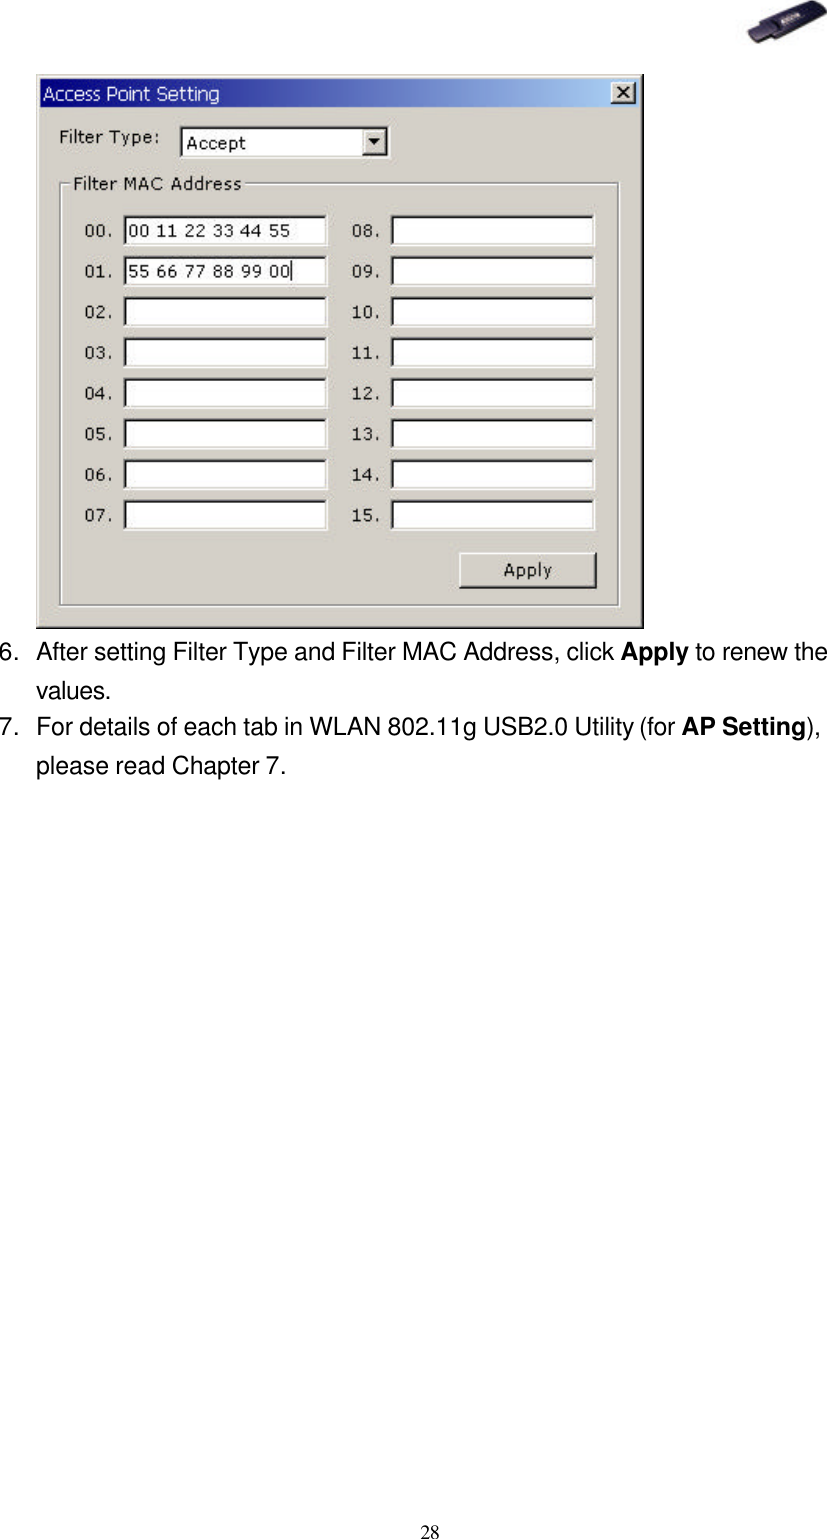   28  6. After setting Filter Type and Filter MAC Address, click Apply to renew the values. 7. For details of each tab in WLAN 802.11g USB2.0 Utility (for AP Setting), please read Chapter 7.  